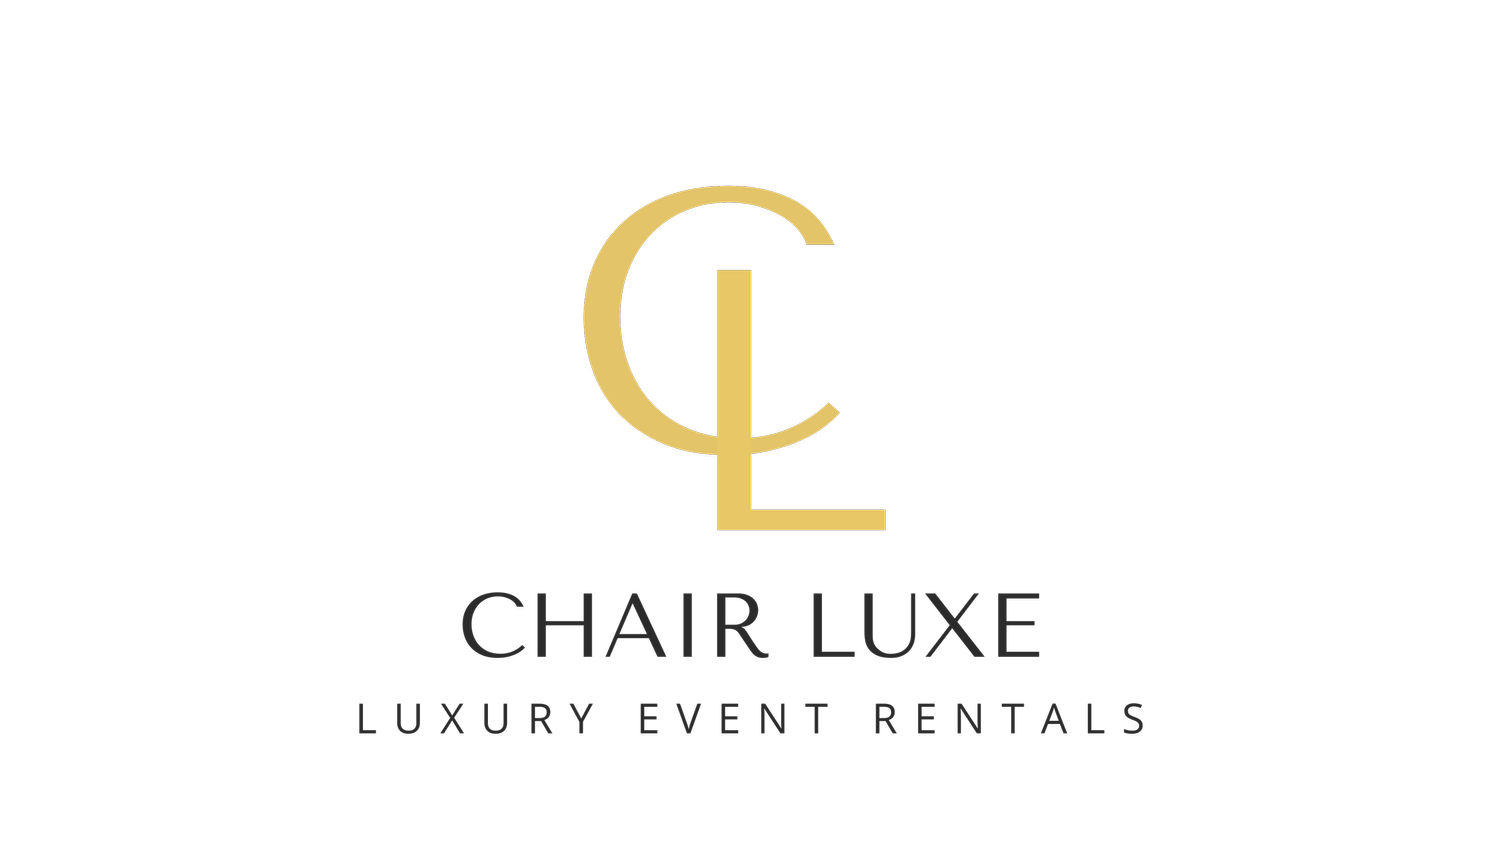 CHAIR LUXE